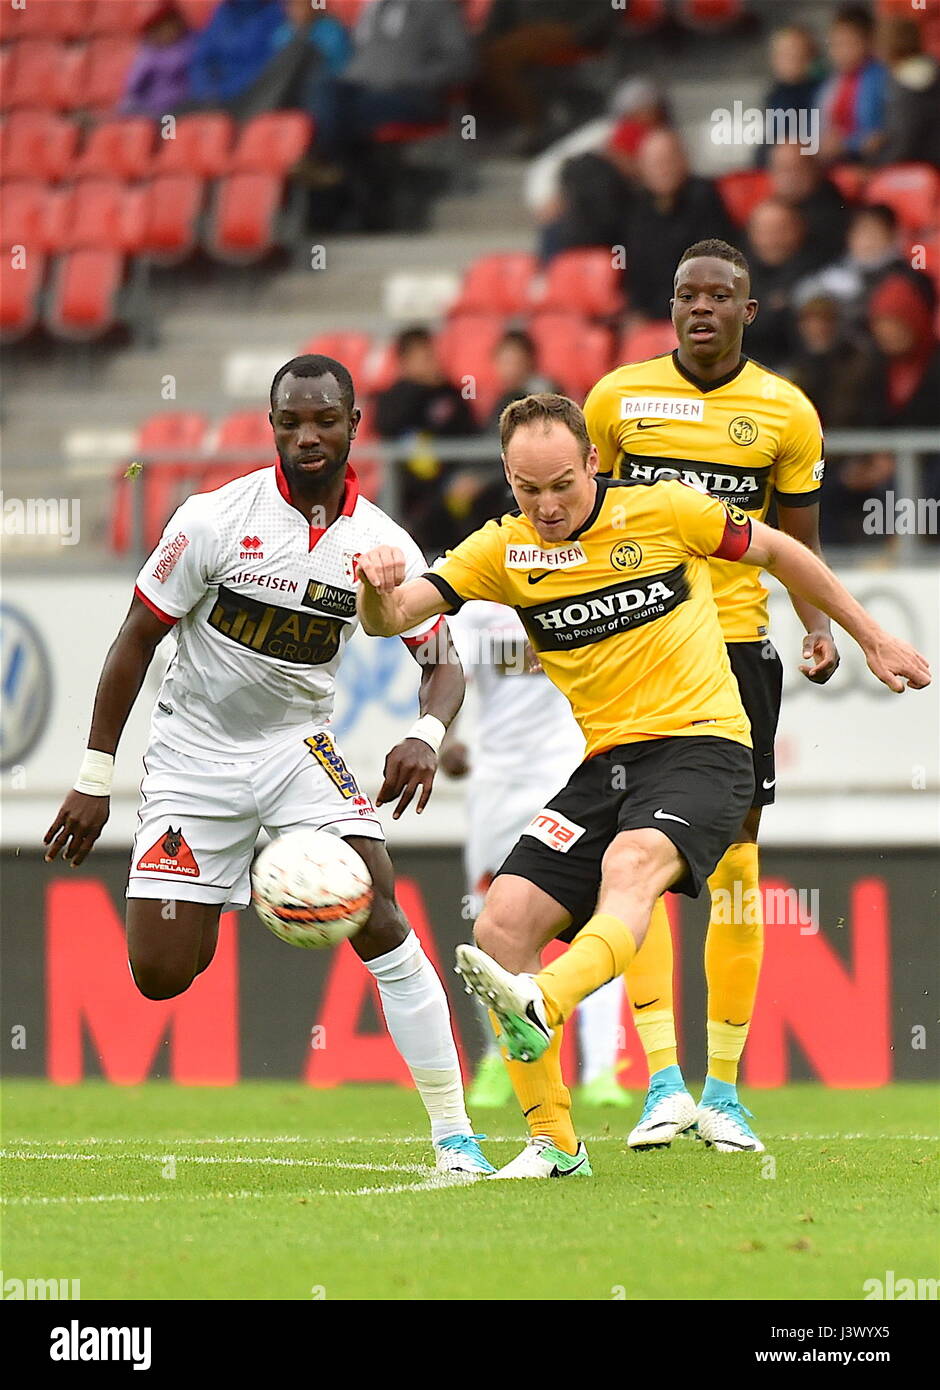 Sion, 07.05.2017, Football, FC Sion - FC Young Boys, Moussa Konate (FC Sion 14) the duel with Steve Von Bergen (YB 5) Photo: Cronos/Frederic Dubuis Stock Photo